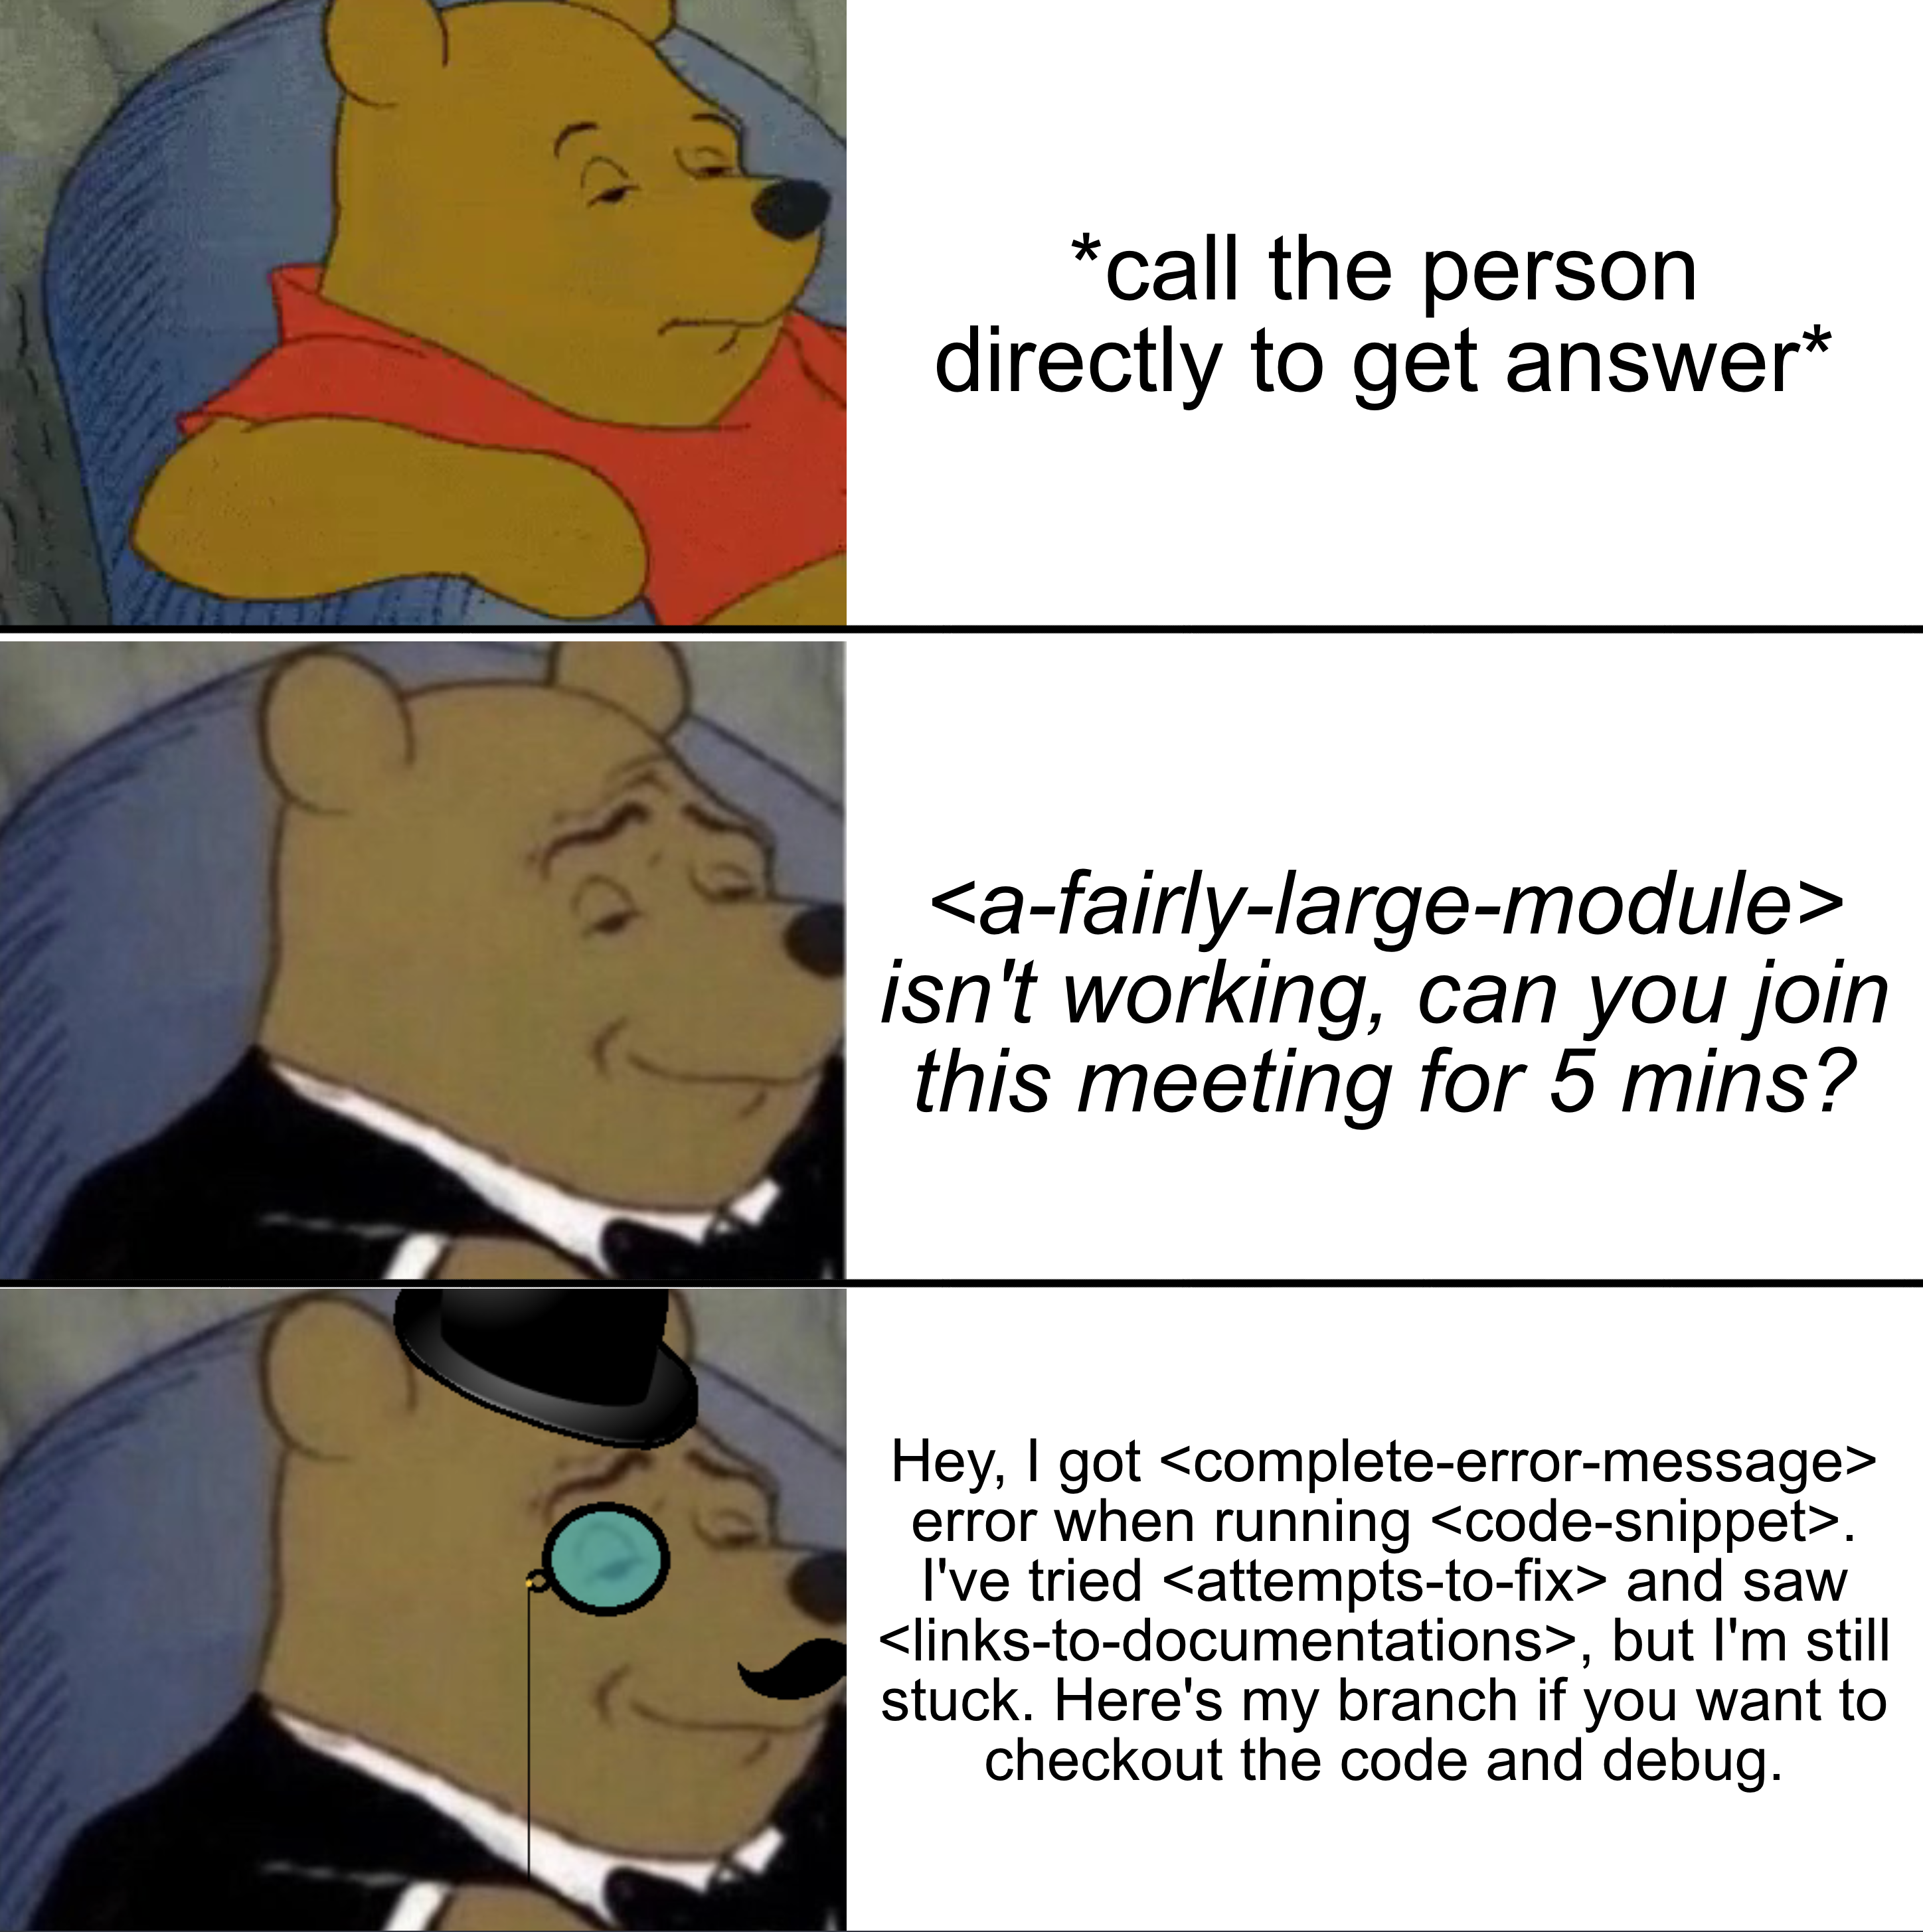 Image comparing 3 examples of articulation. First: call the person directly to get answer, Second: "a-fairly-large-module isn't working , can you join this meeting for 5 minutes?", Third: "Hey, I got complete-error-message error when running code-snippet. I've tried attempts-to-fix and saw links-to-documentation, but I'm still stuck. Here's my code branch if you want to checkout and debug.">